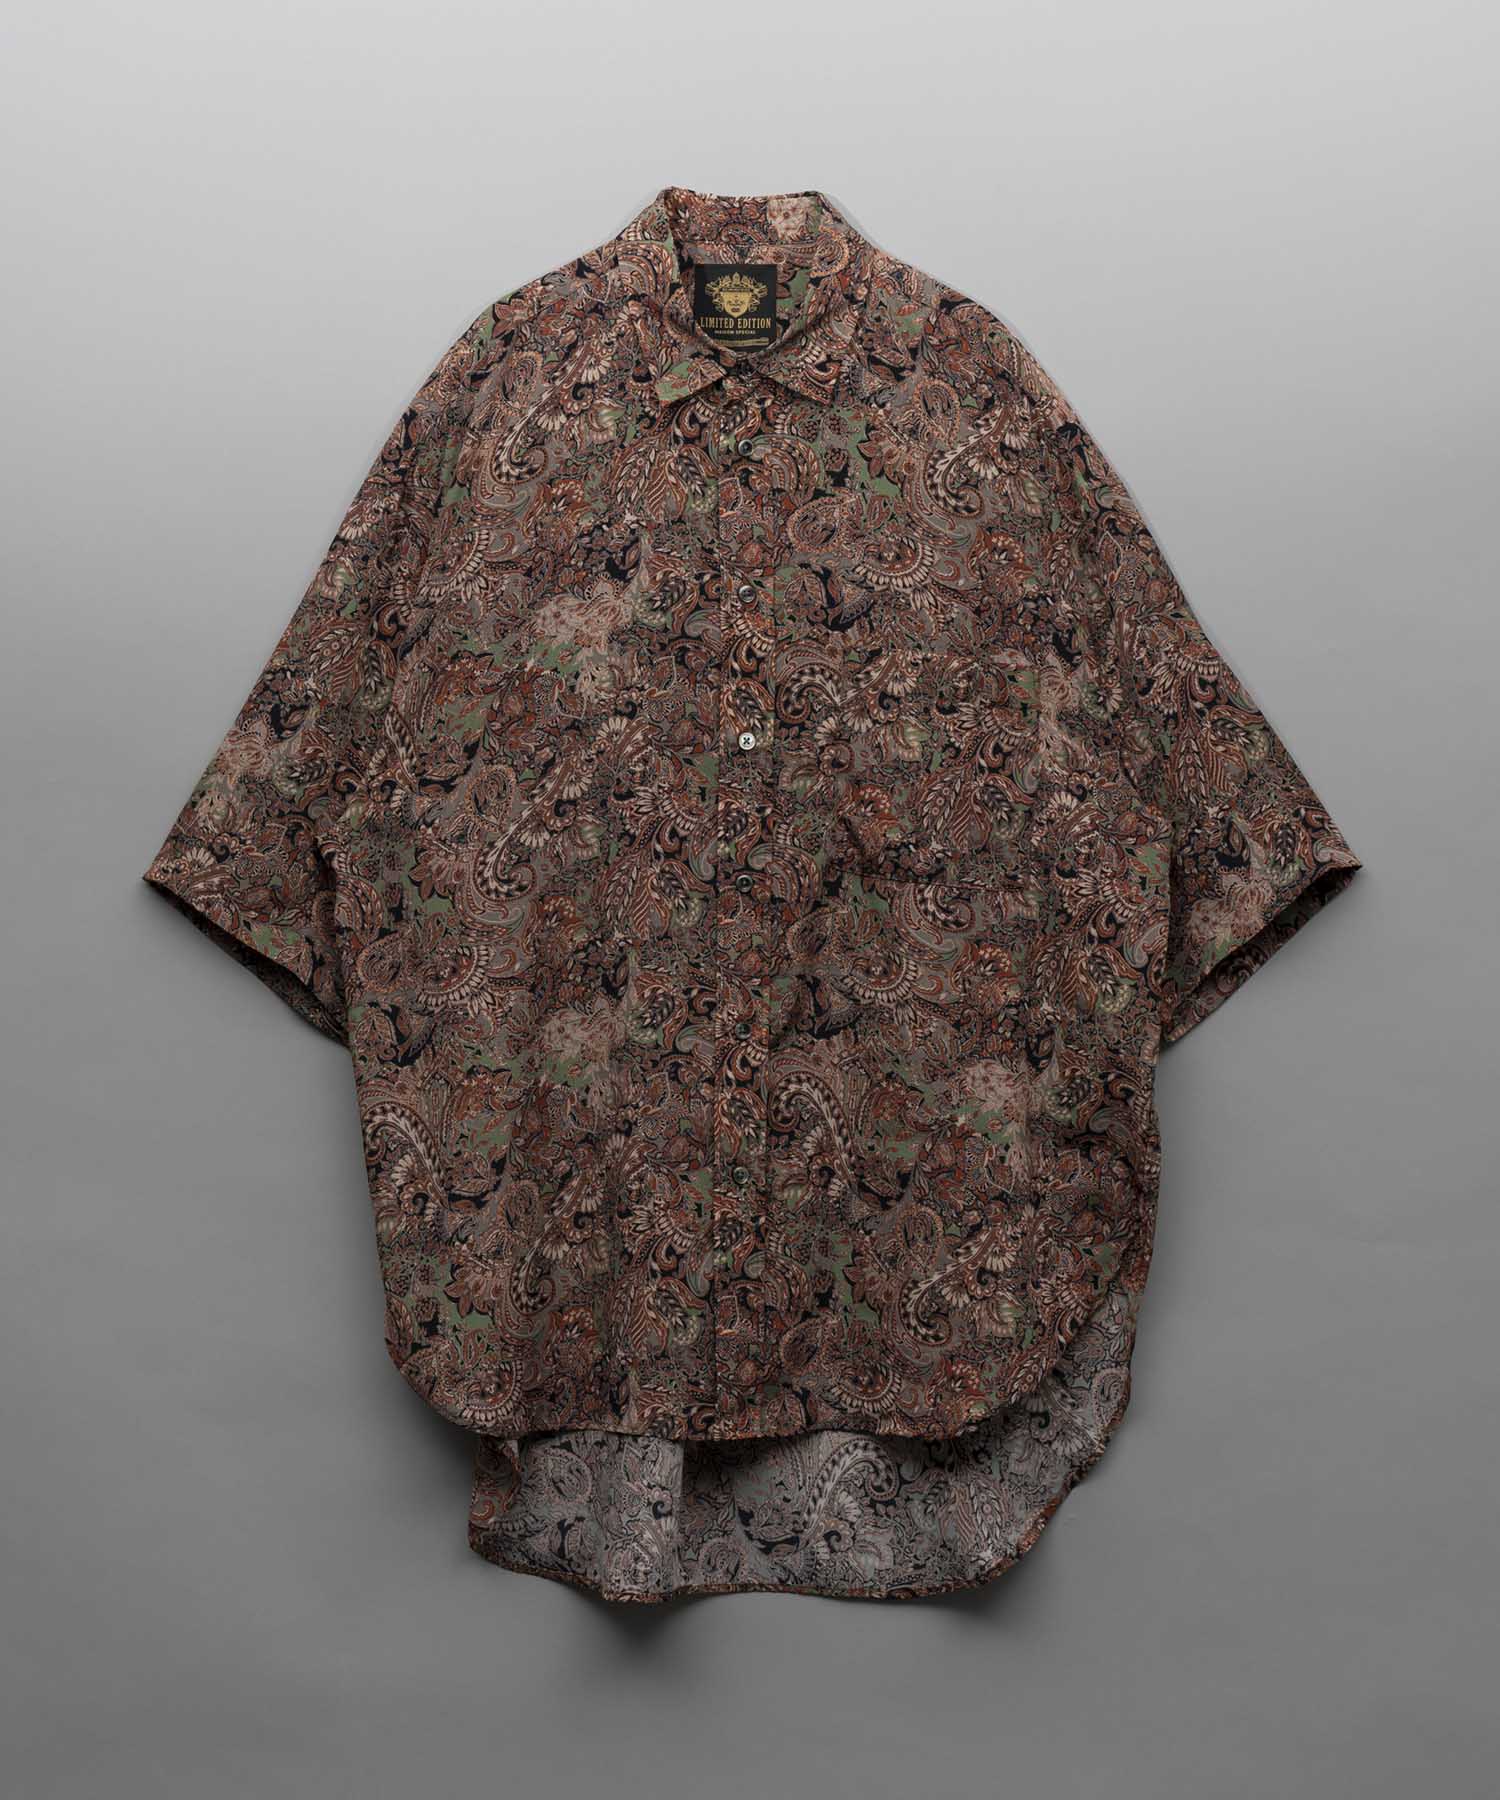 【LIMITED EDITION】Prime-Over Short Sleeve Shirt Coat